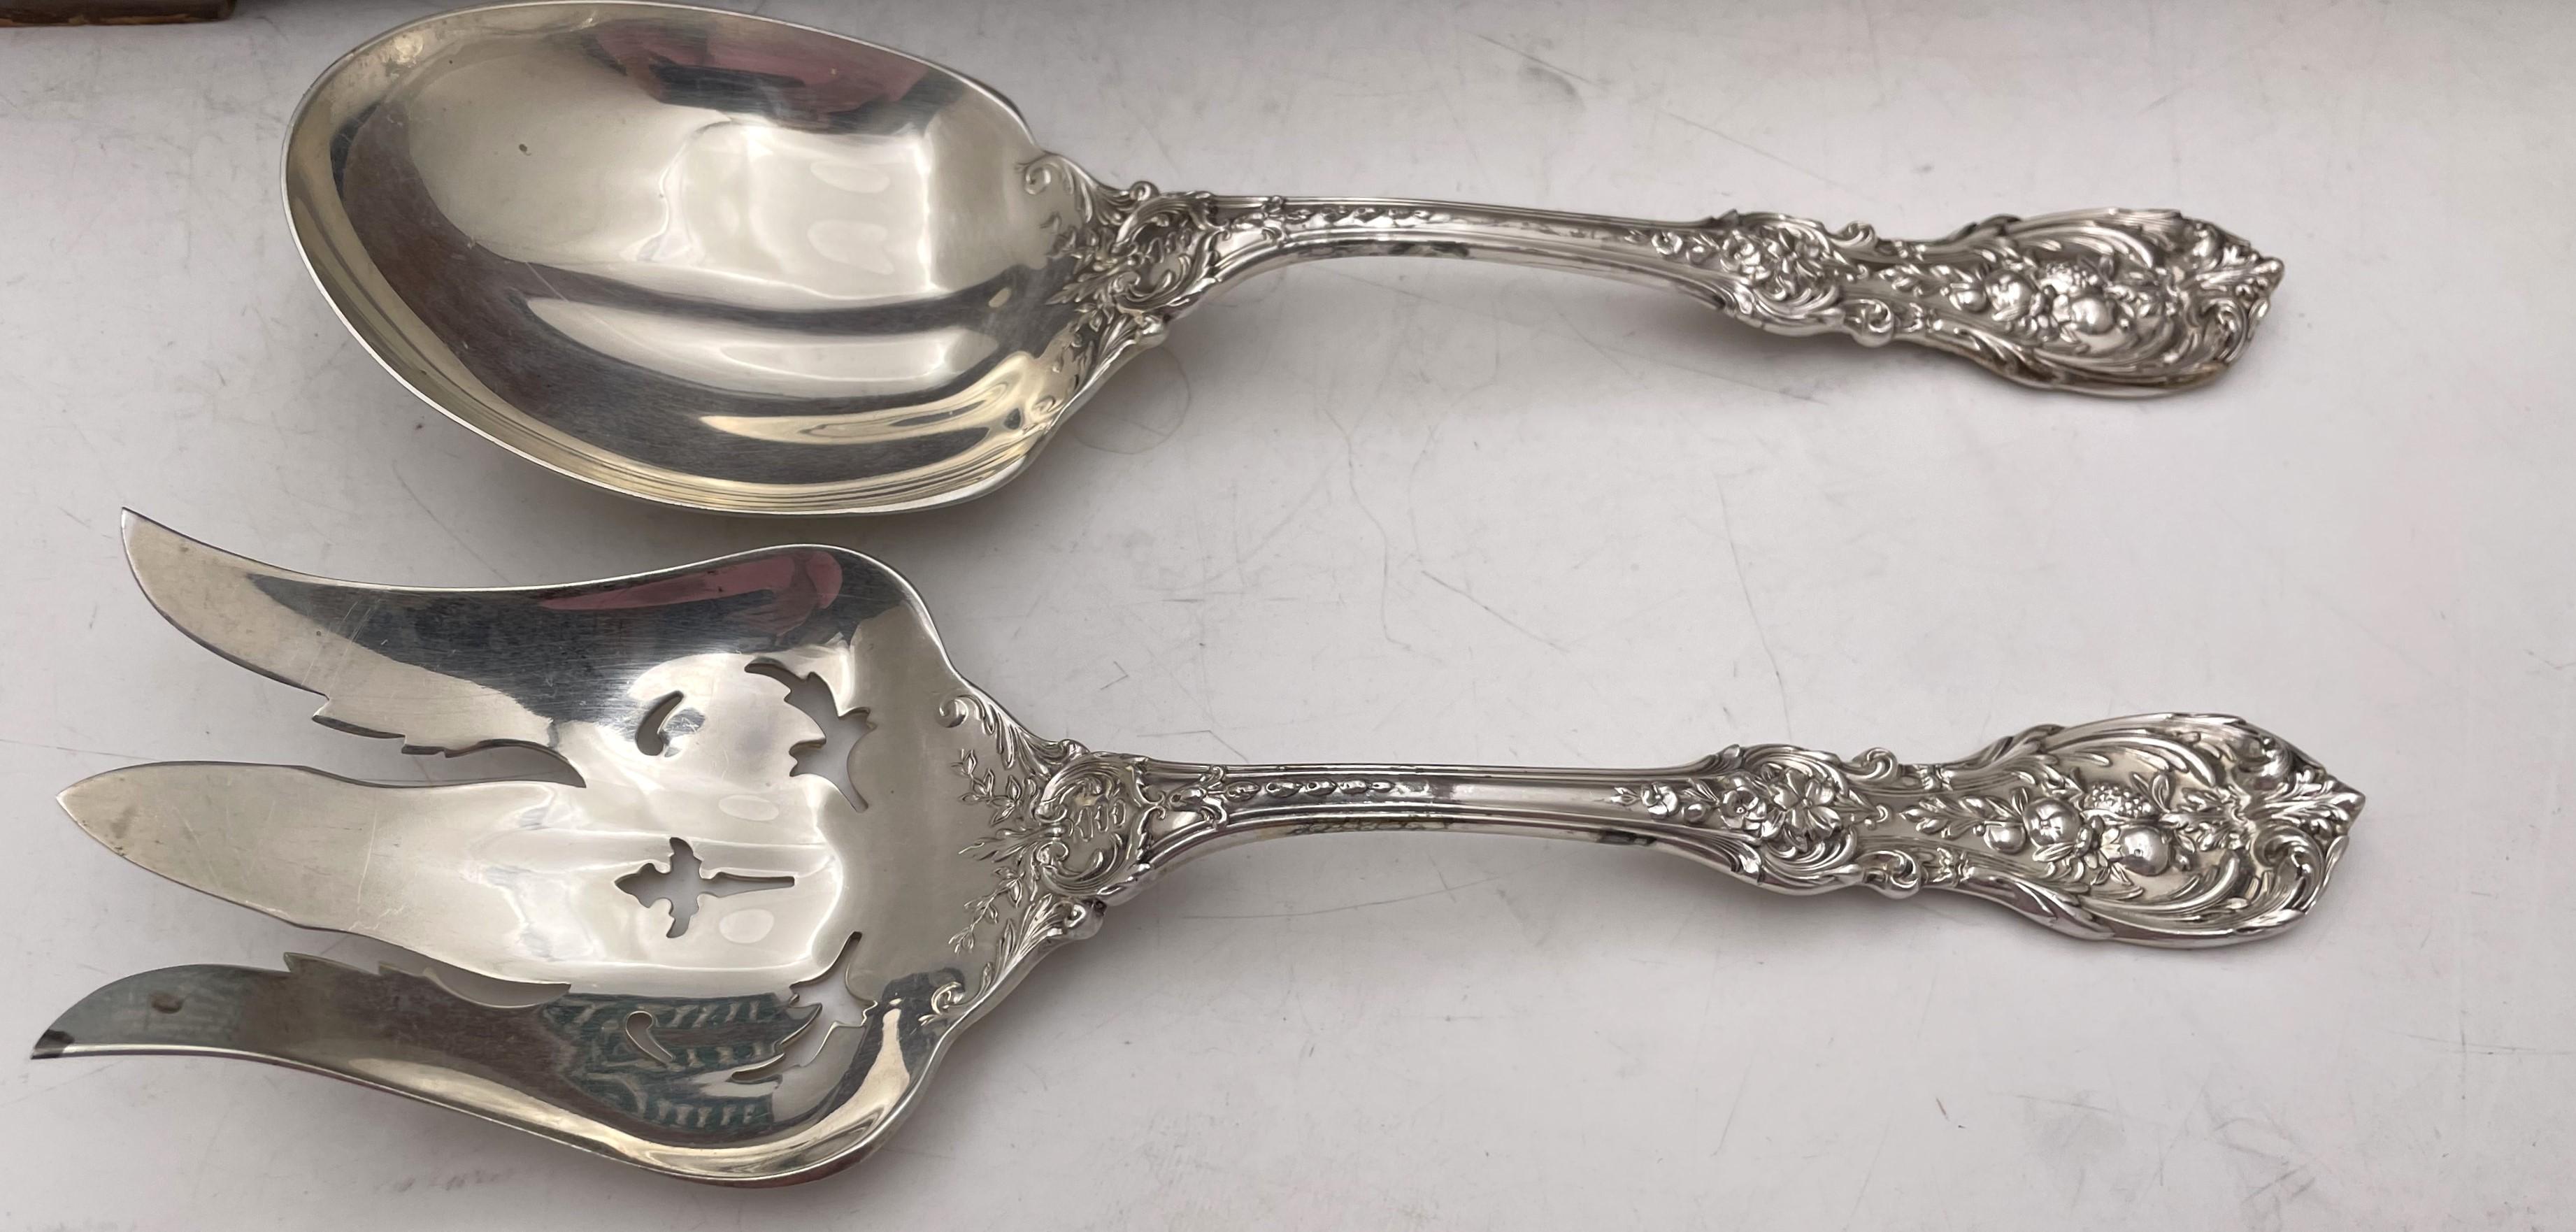 Reed & Barton sterling silver 90-piece flatware set in the celebrated Francis I pattern with exquisite fruit and floral motifs in Art Nouveau style consisting of:

- 12 French dinner knives measuring 9'' in length 

- 12 hollow-handled butter